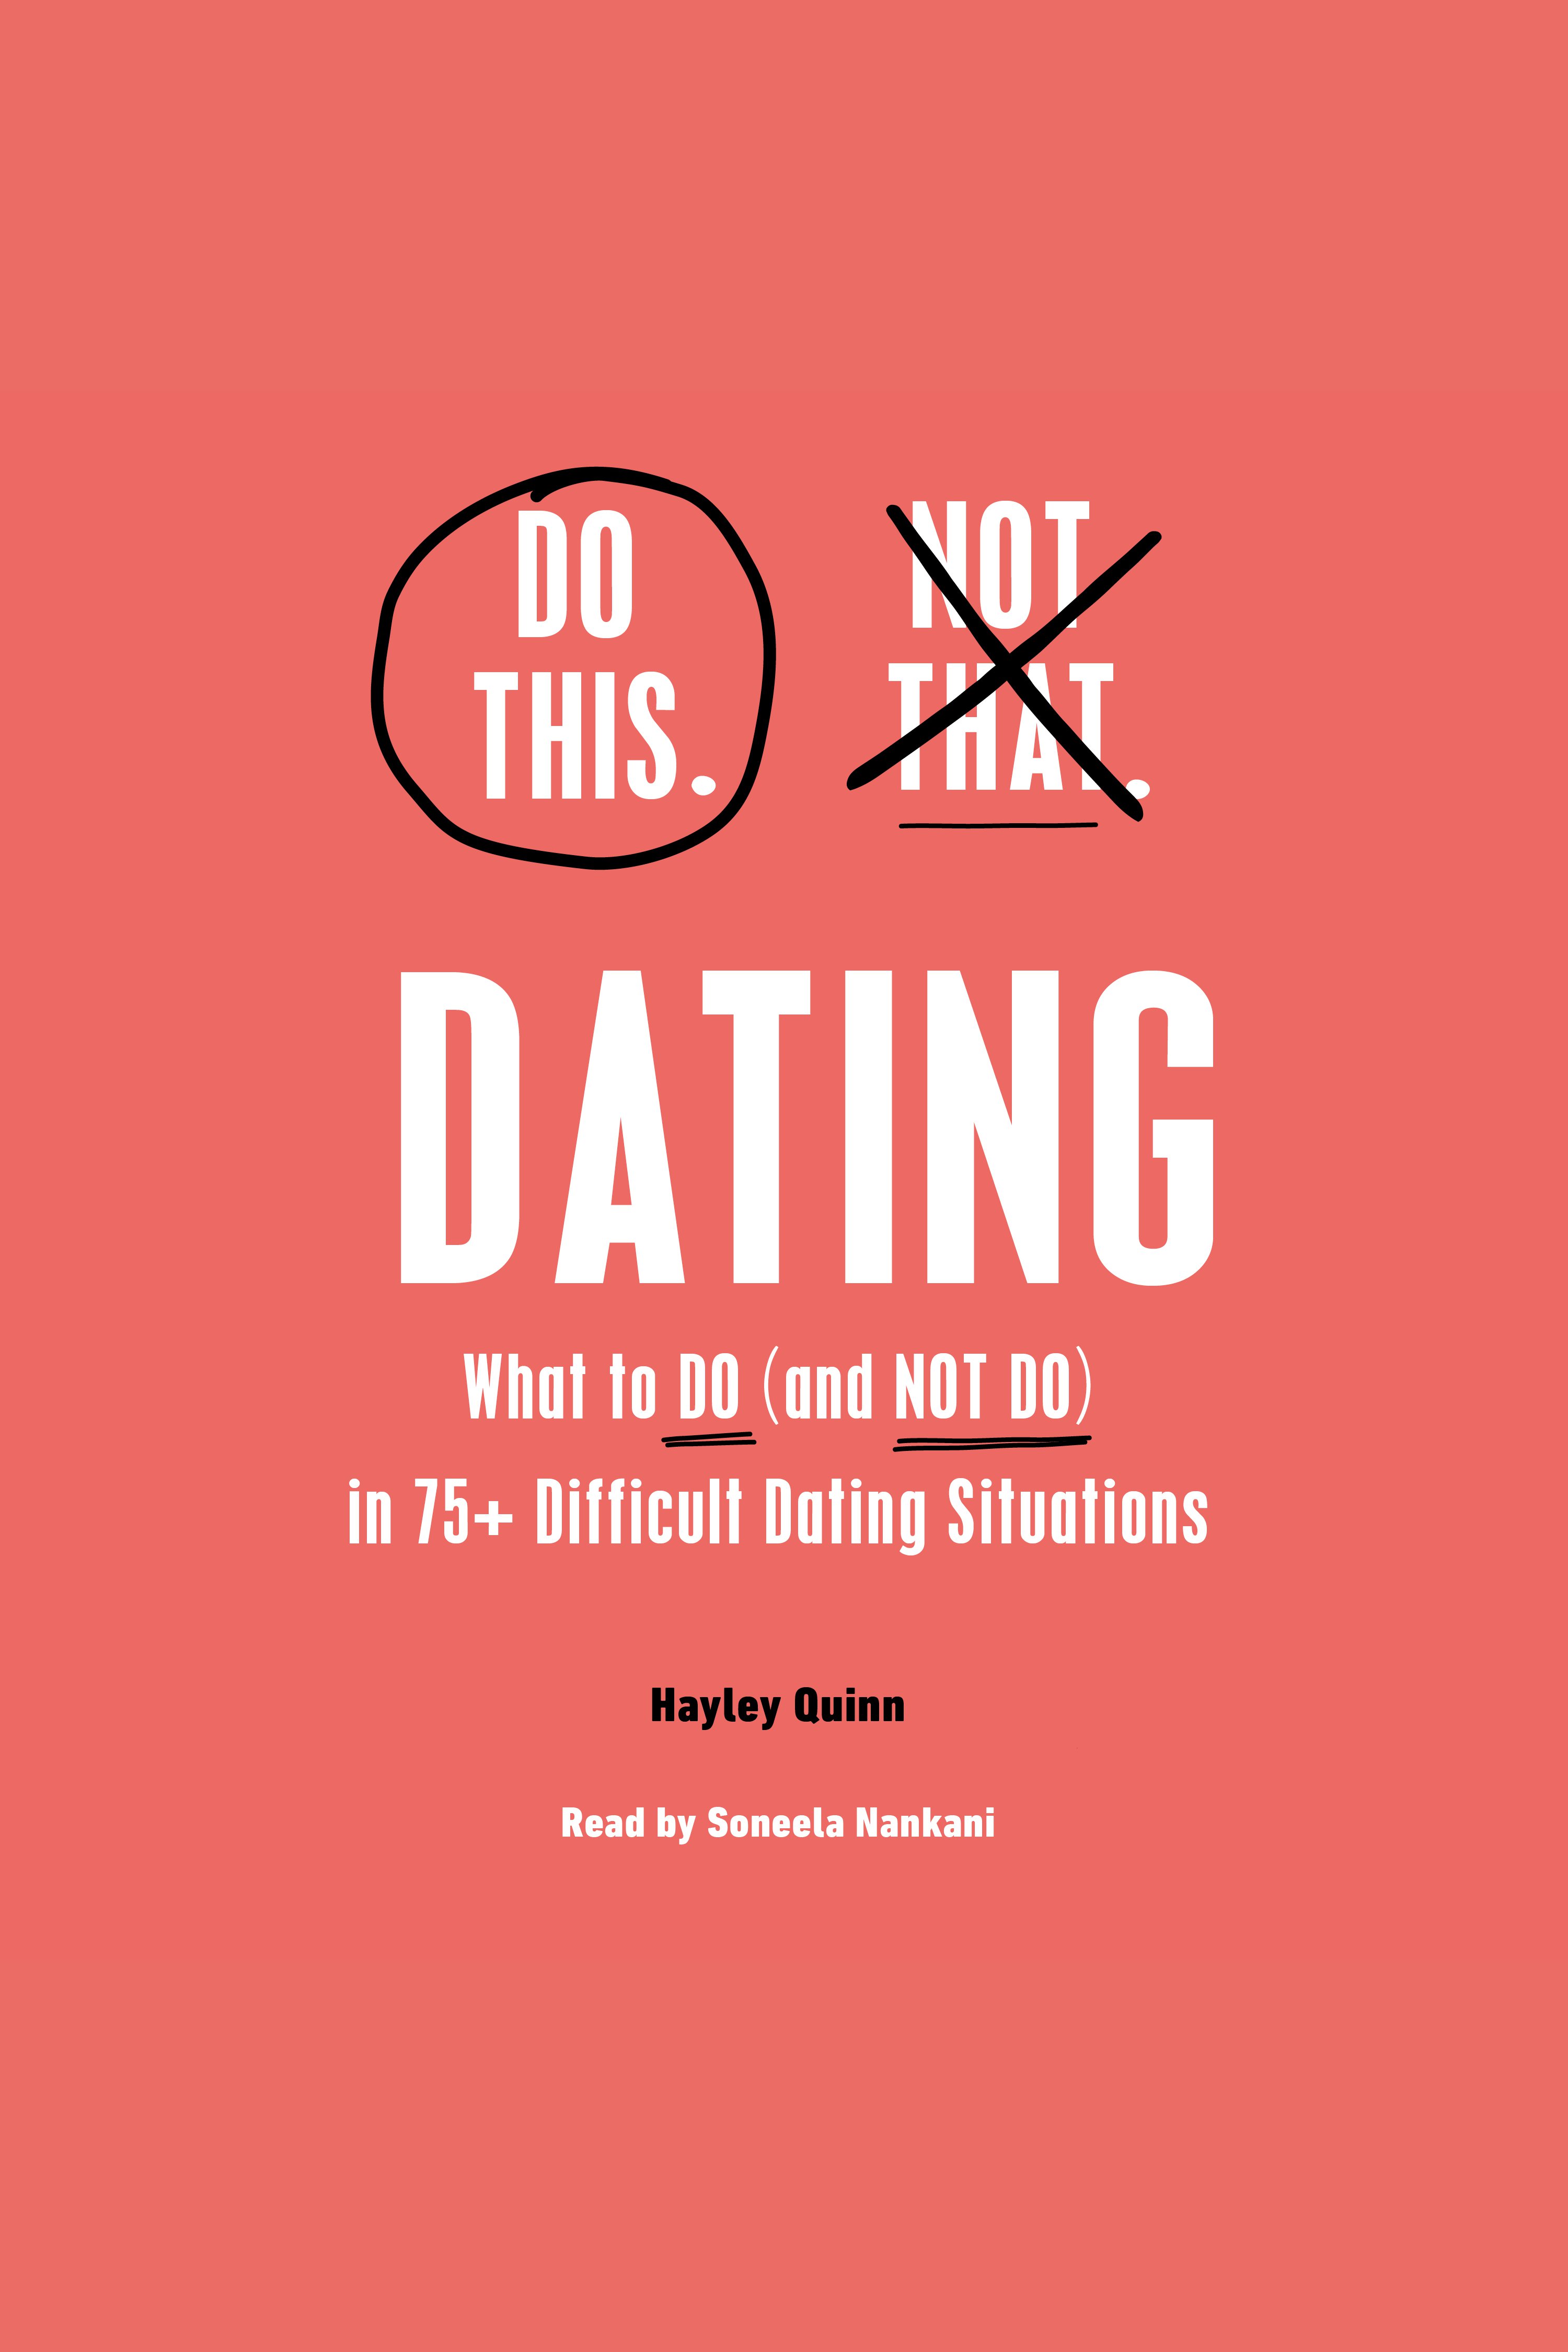 Do This, Not That: Dating Learn the Dos and Don'ts of: Where (and How) to Meet People, Building Honest Communication, Having Better Sex, And More Must-Haves for Happy, Lasting Relationships